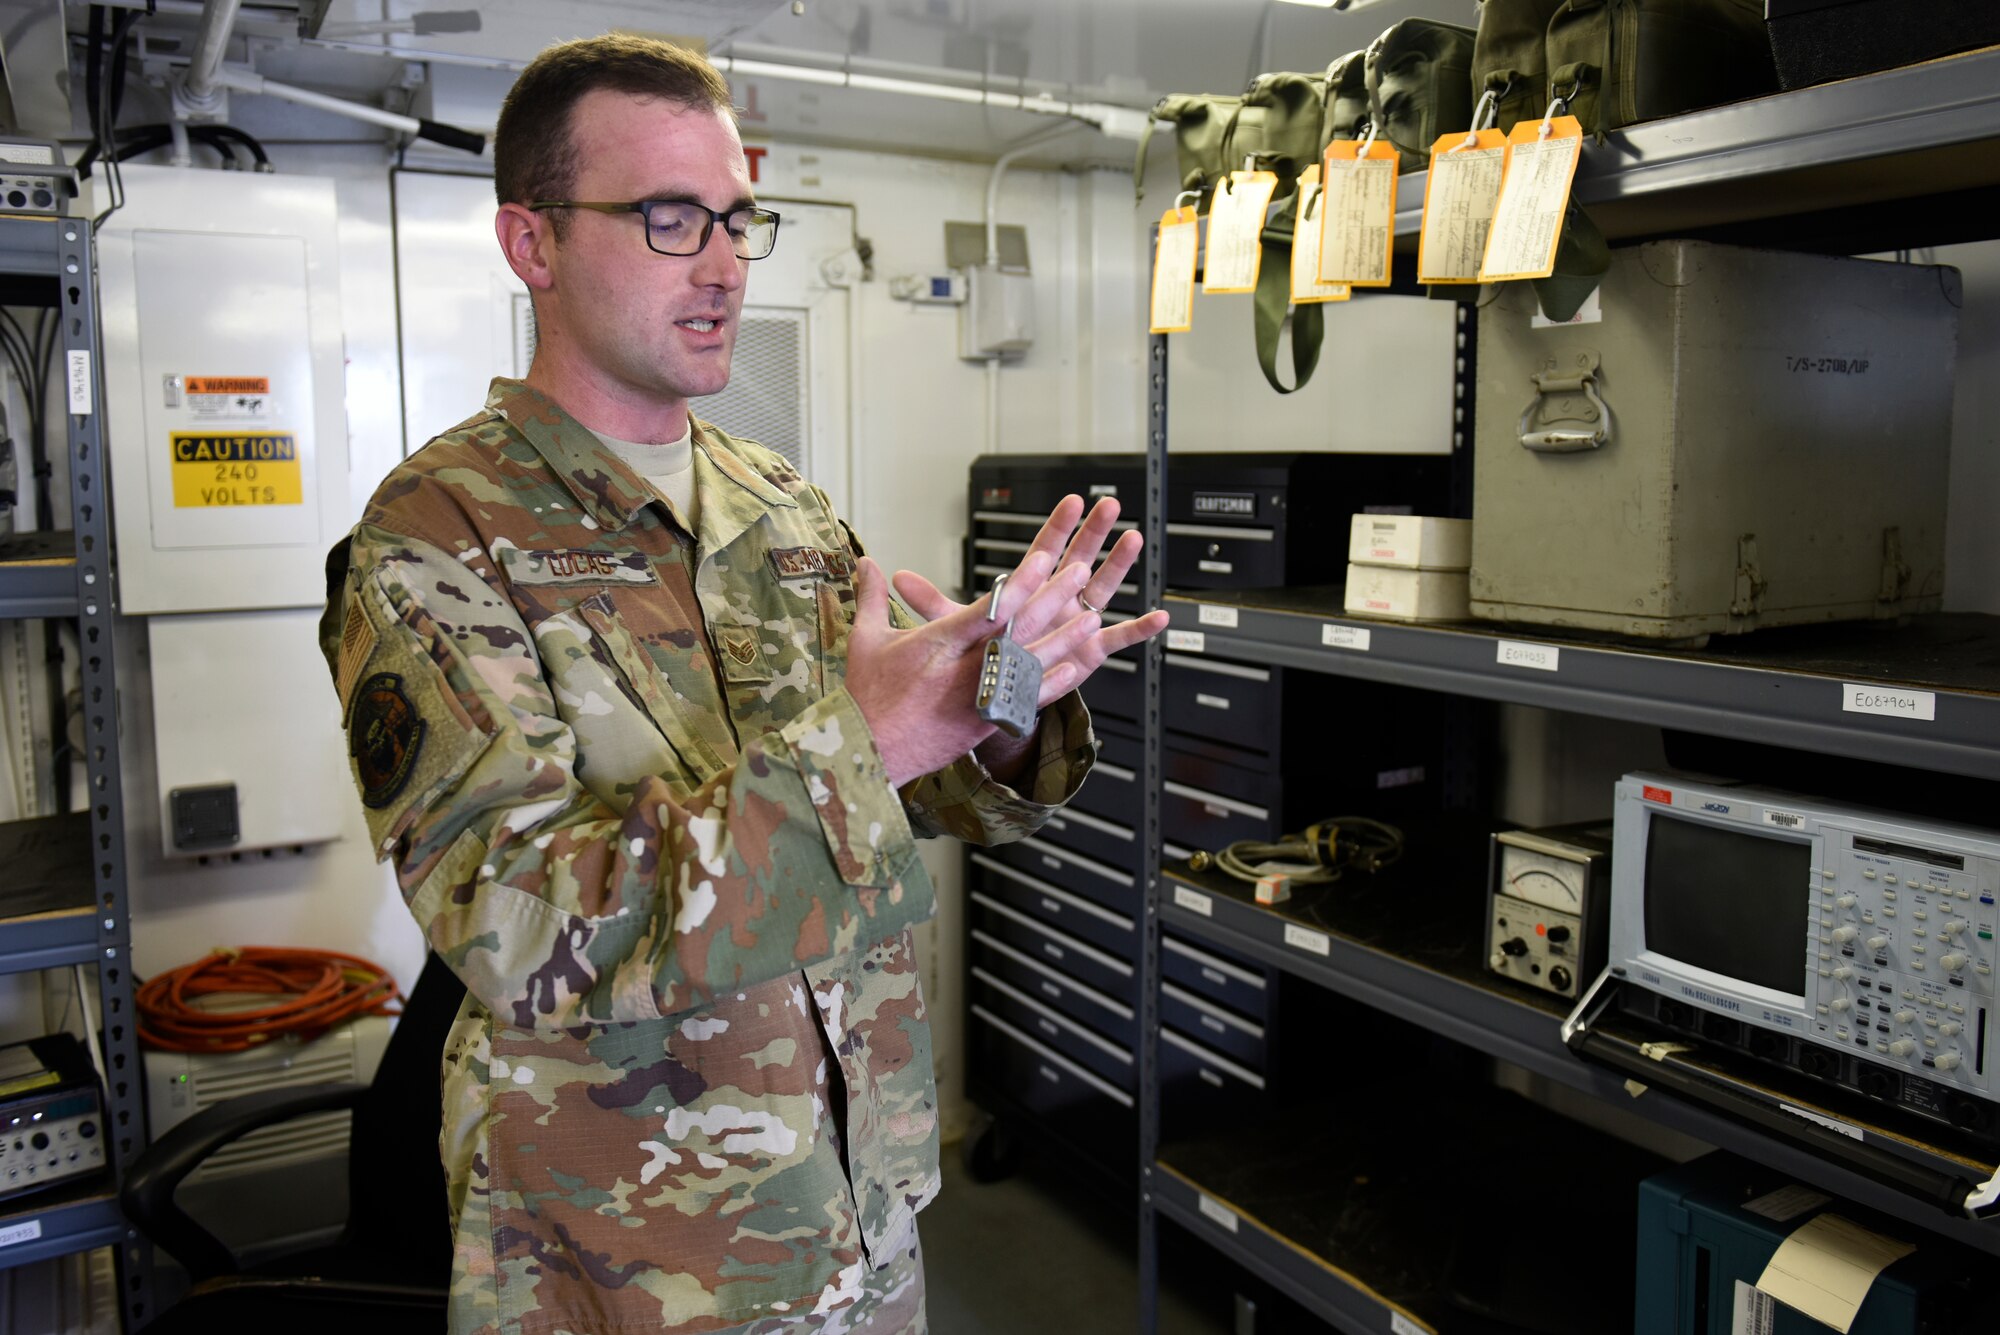 U.S. Air Force Staff Sgt. William Lucas, radar airfield weather systems technician with the 235th Air Traffic Controller Squadron, demonstrates the use of tactical radar equipment in New London, N.C., Aug. 3rd, 2019. The North Carolina Air National Guard, along with New Hampshire and Maine Air National Guard, flew to Ramstein Air Base, Germany to work with active duty 1st Combat Communications Squadron. The Air National Guard units assisted in training the active duty unit with set-up, use, and tear-down of a mobile tower and deployable tactical air navigation system.